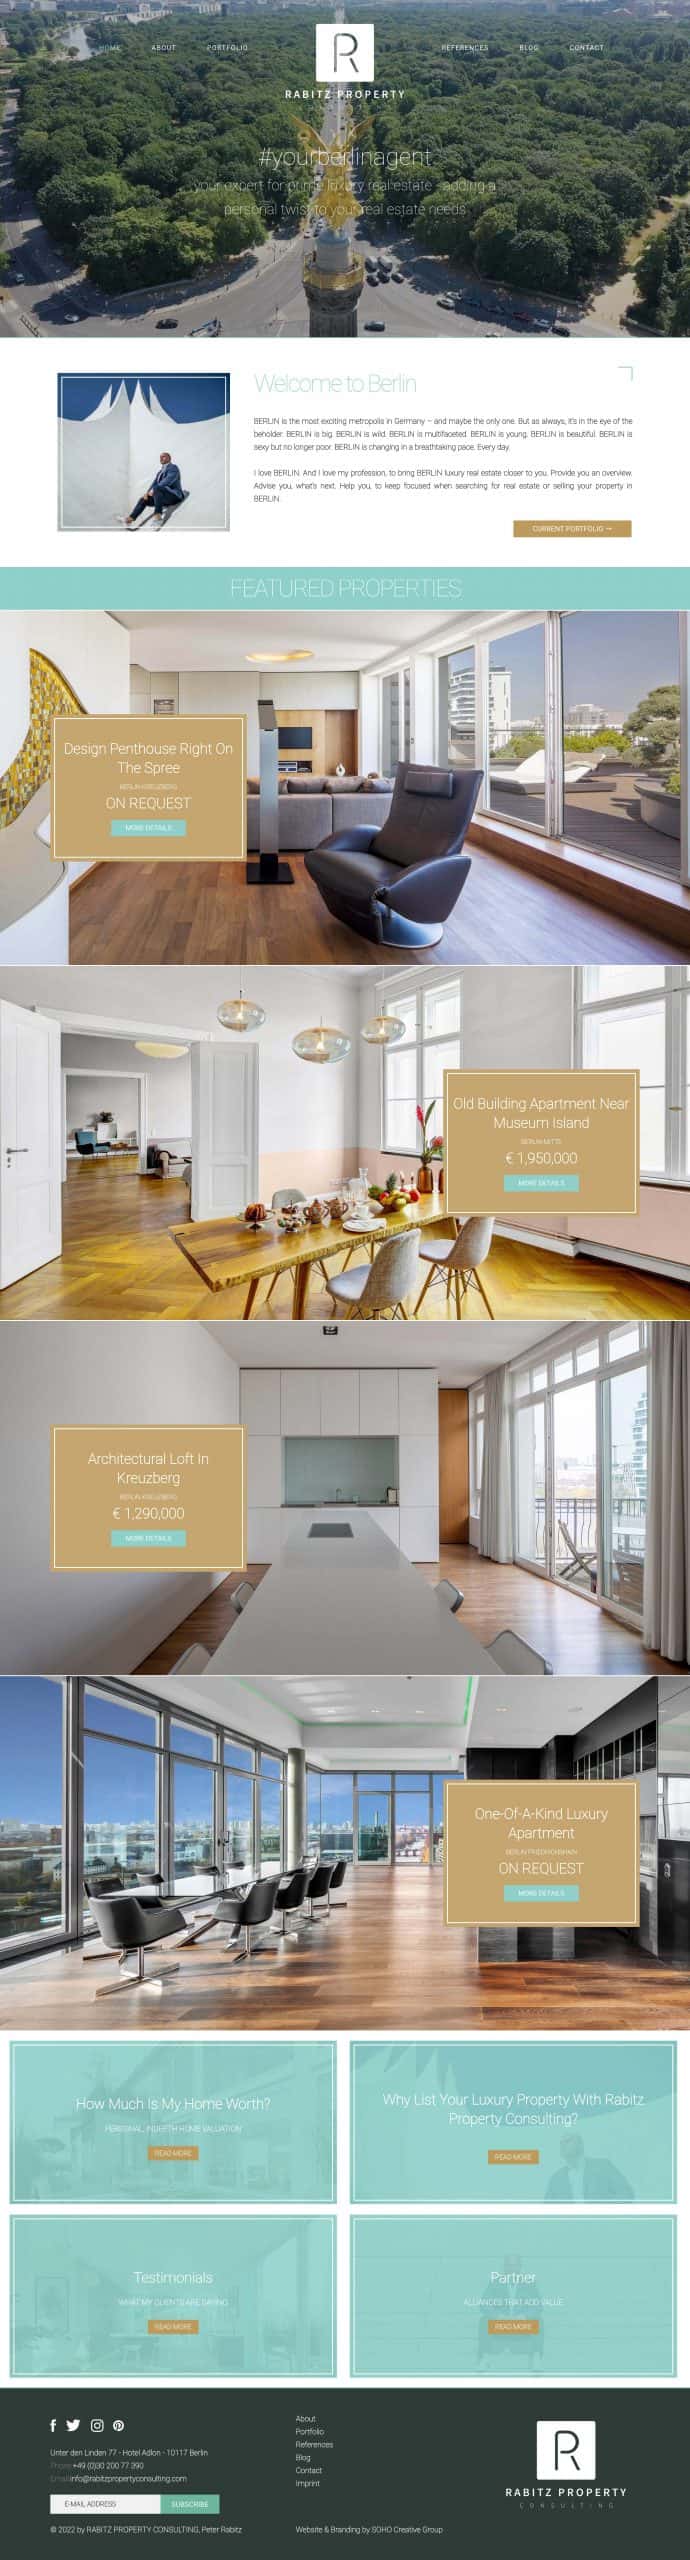 rabitz-property-consulting-berlin-luxury-real-estate-agent